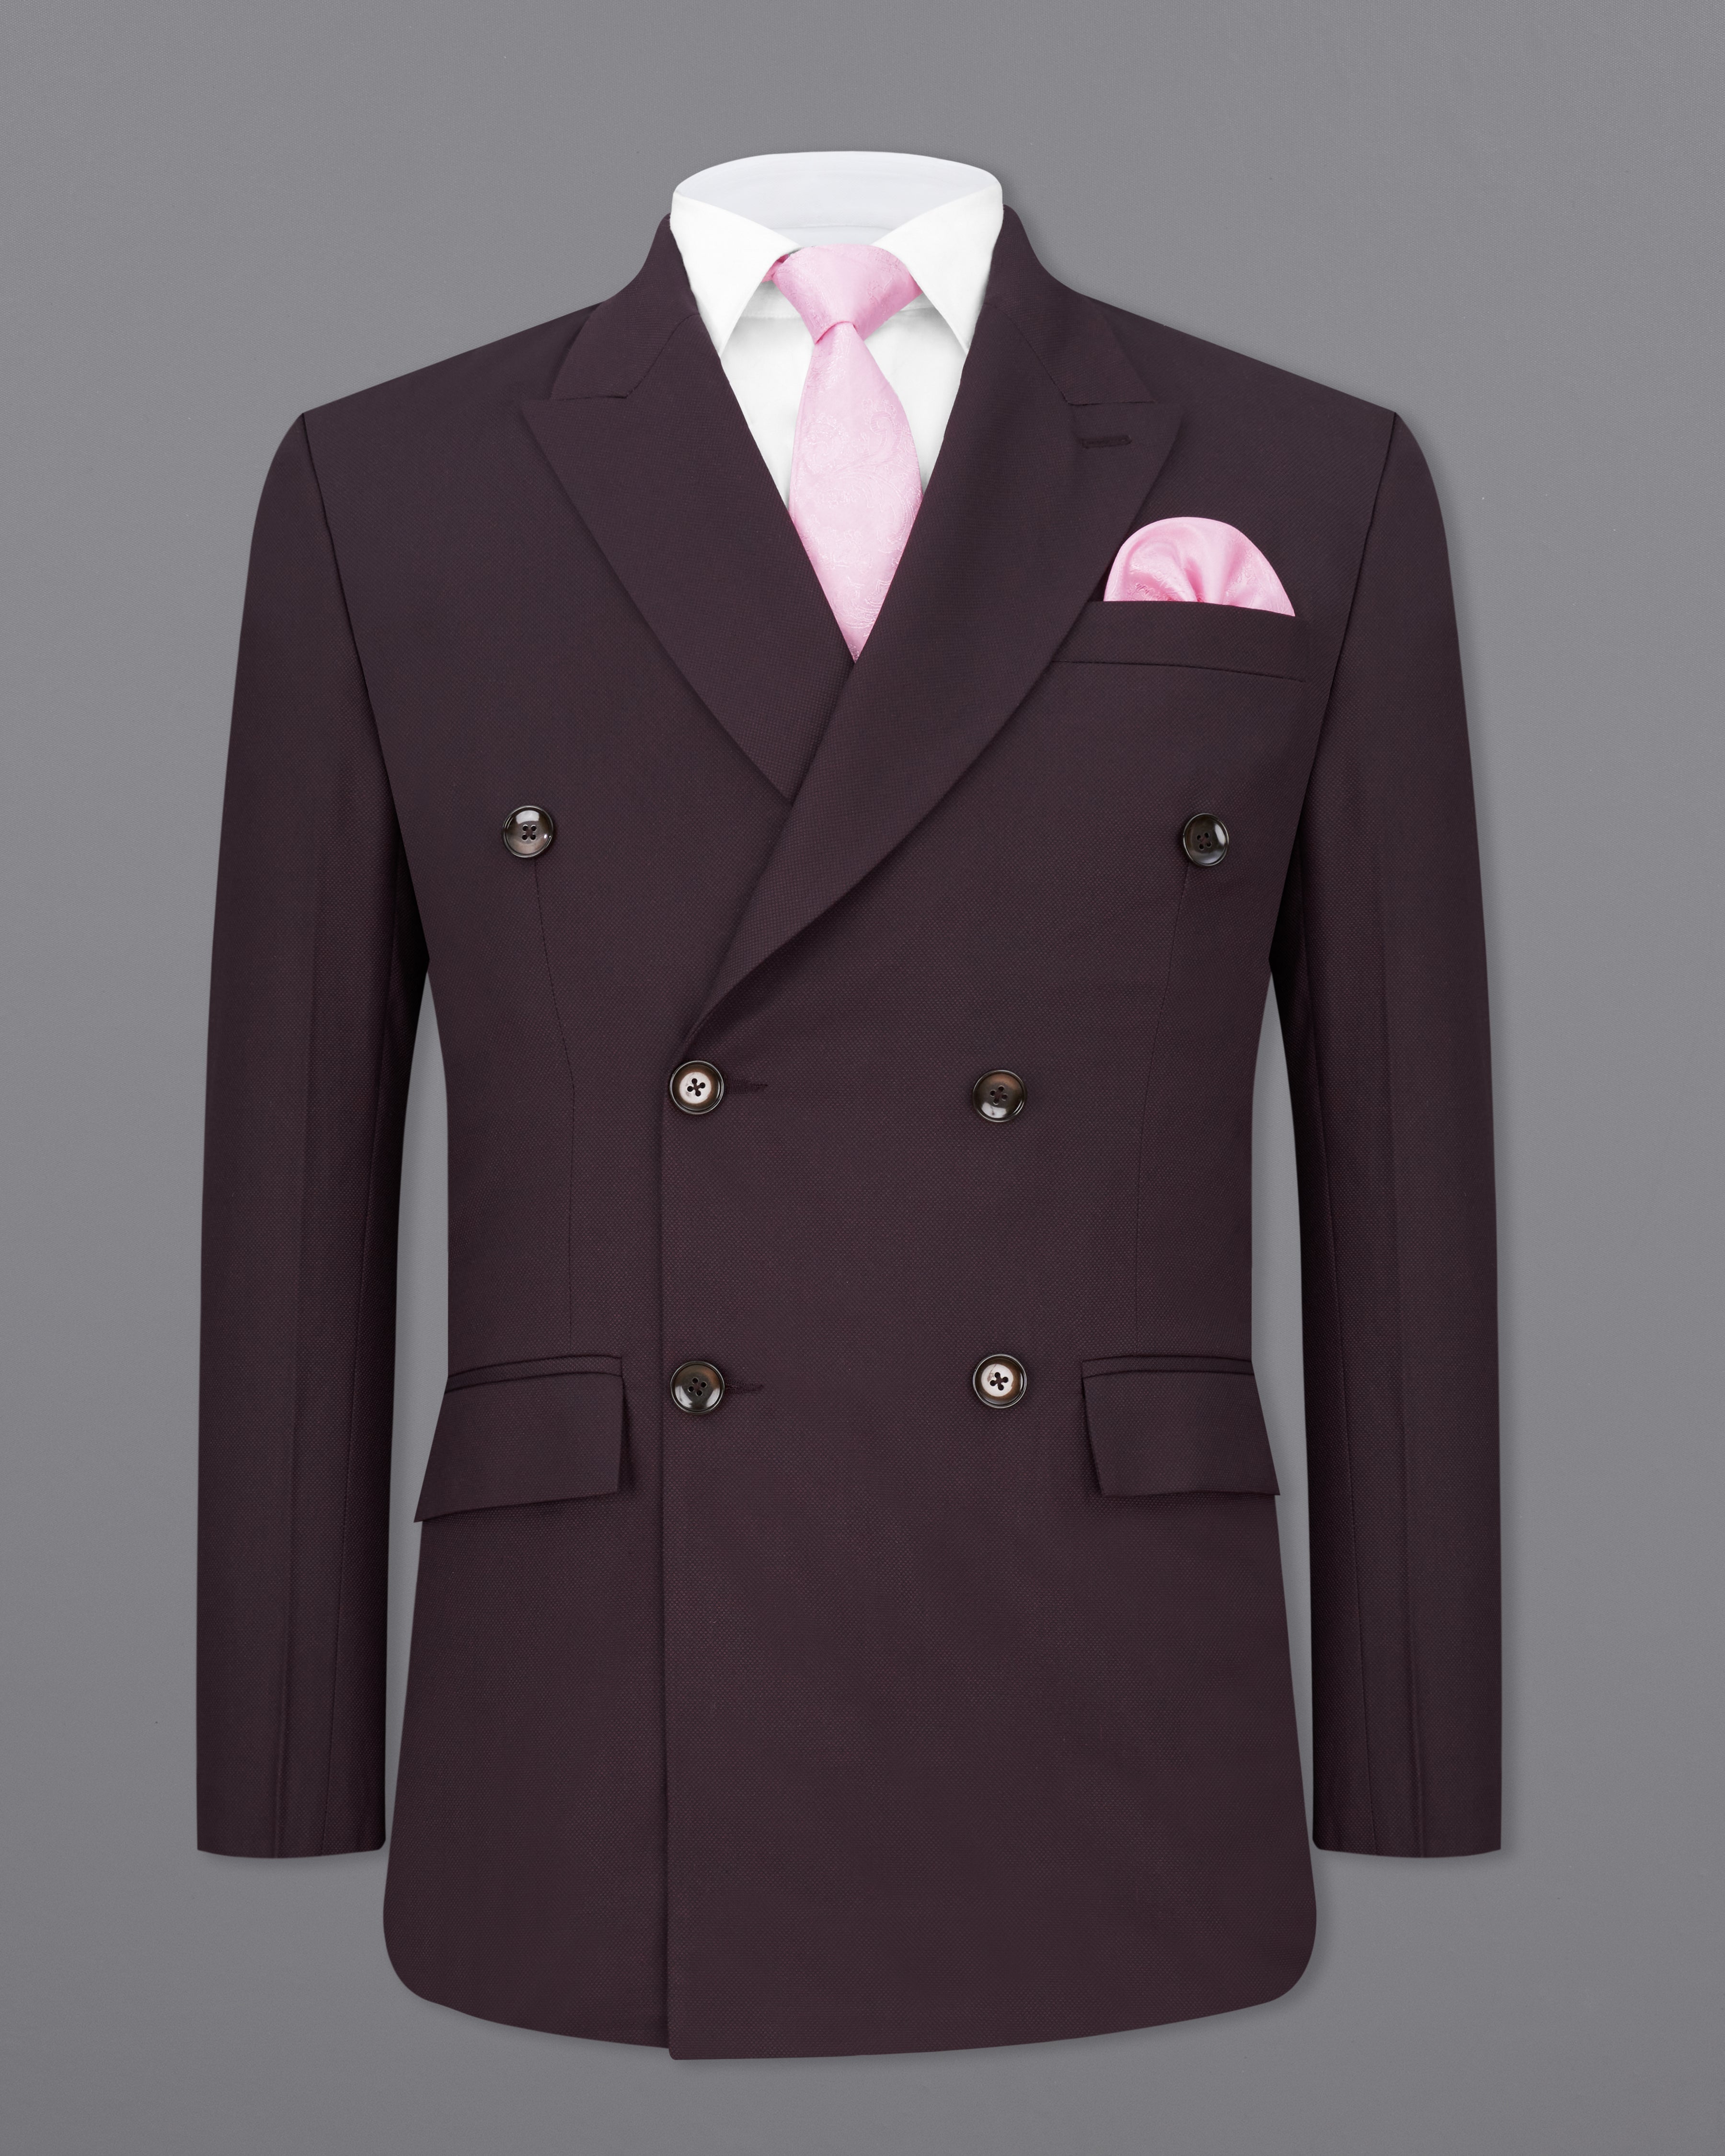 Aubergine Maroon Double Breasted Suit ST2289-DB-36, ST2289-DB-38, ST2289-DB-40, ST2289-DB-42, ST2289-DB-44, ST2289-DB-46, ST2289-DB-48, ST2289-DB-50, ST2289-DB-52, ST2289-DB-54, ST2289-DB-56, ST2289-DB-58, ST2289-DB-60